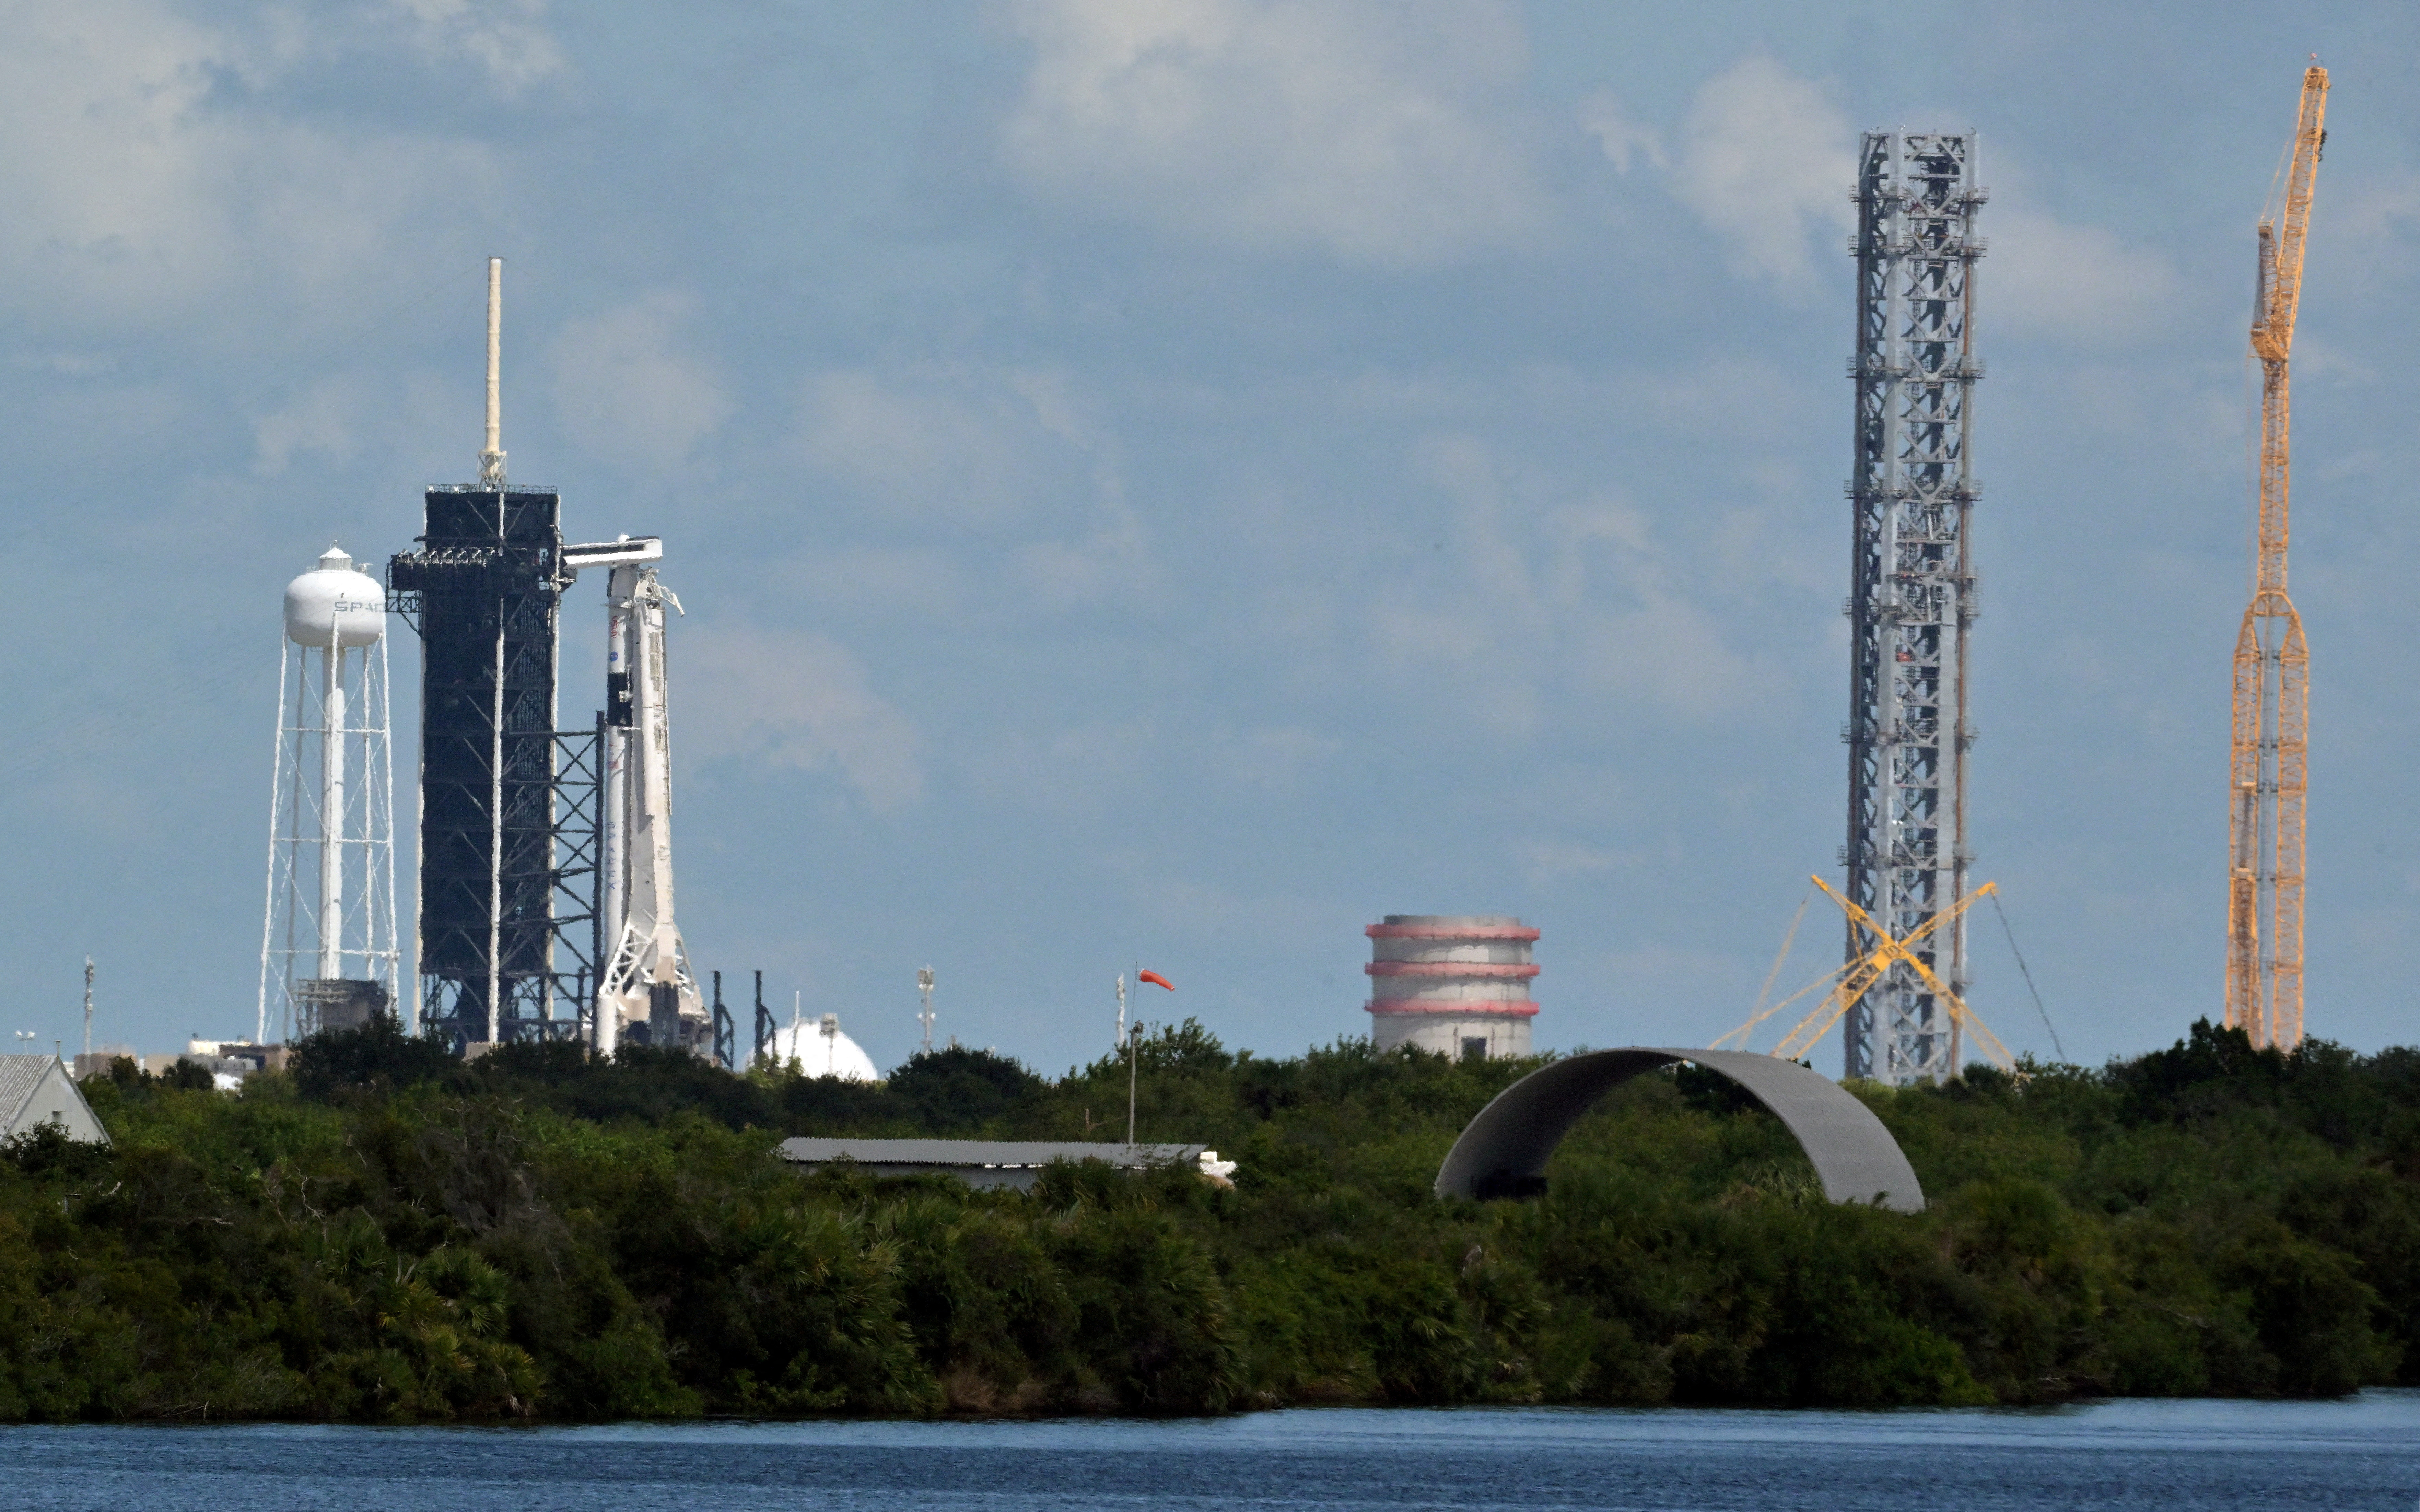 A SpaceX Falcon 9 rocket with the Crew Dragon capsule stands on Pad-39A in preparation for a mission to carry four crew members to the International Space Station